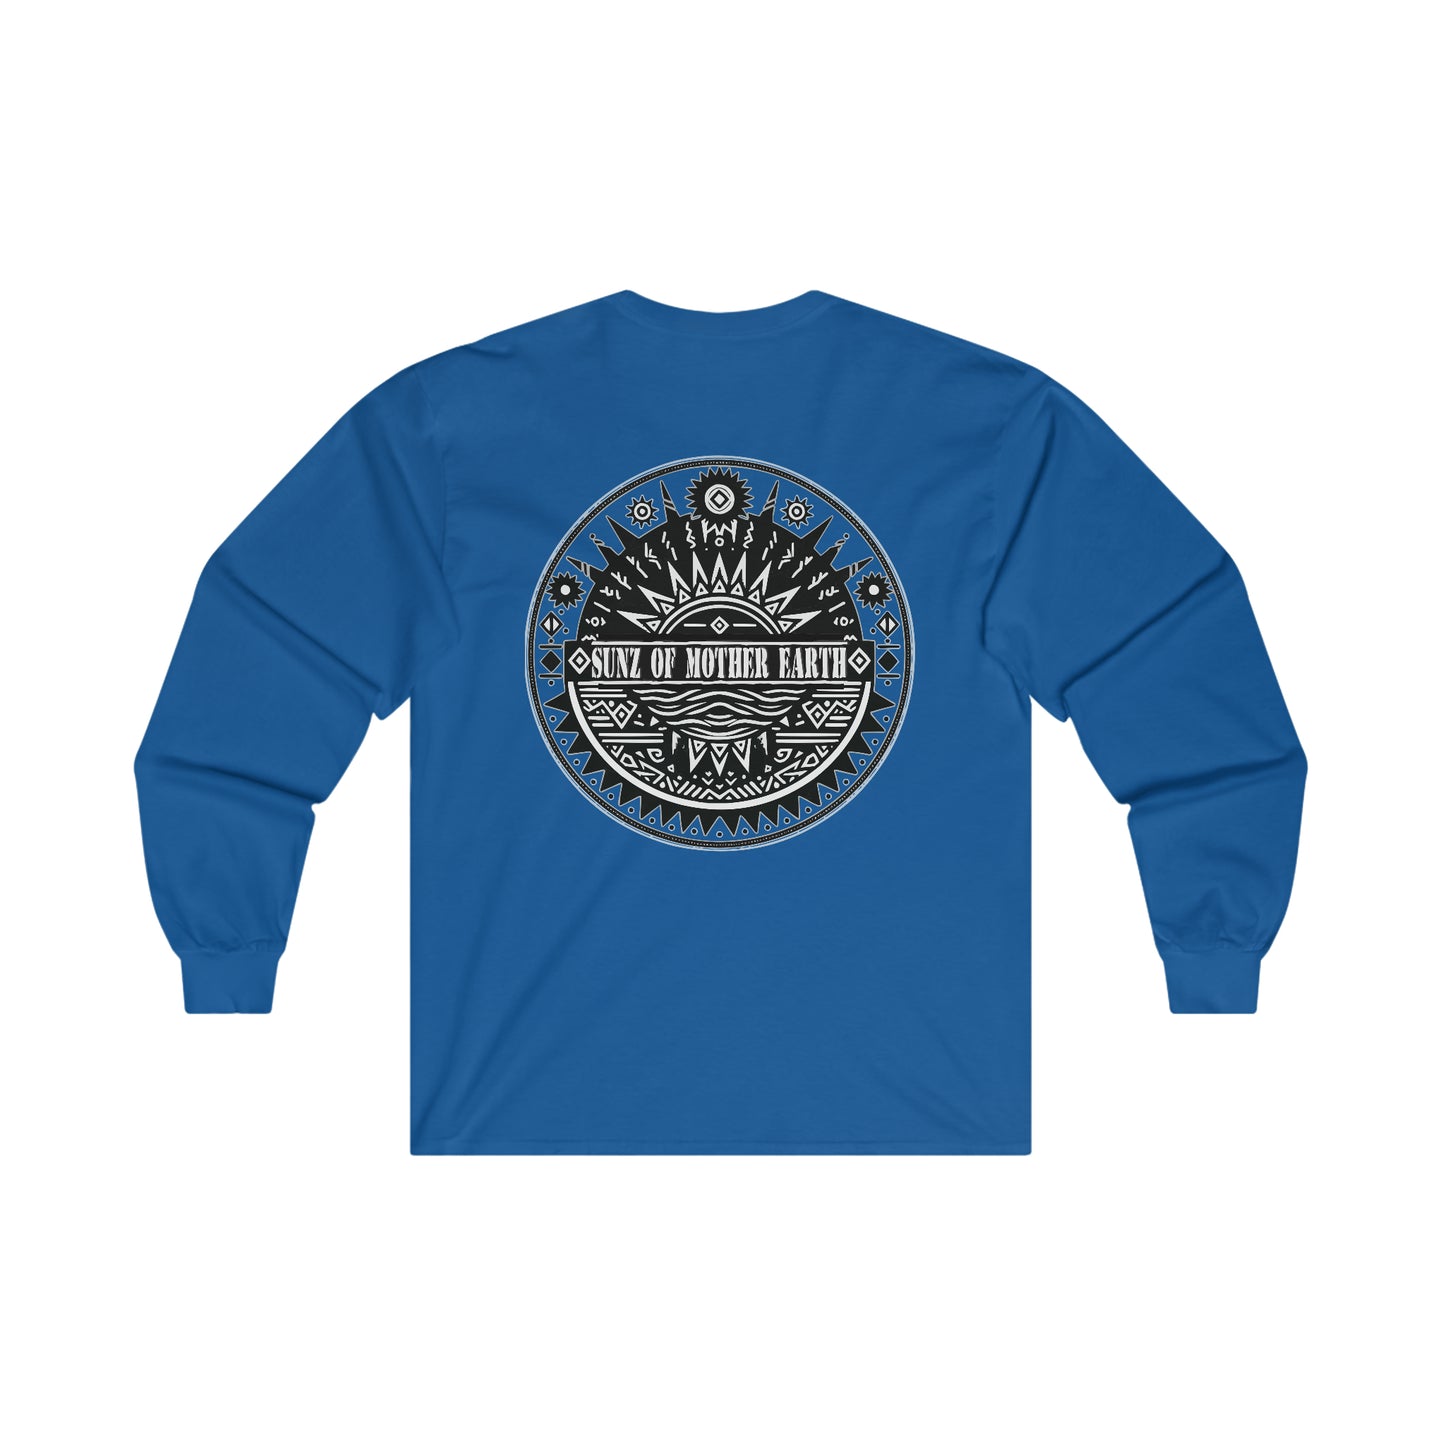 SUNZ OF MOTHER EARTH Ultra Cotton Long Sleeve Tee